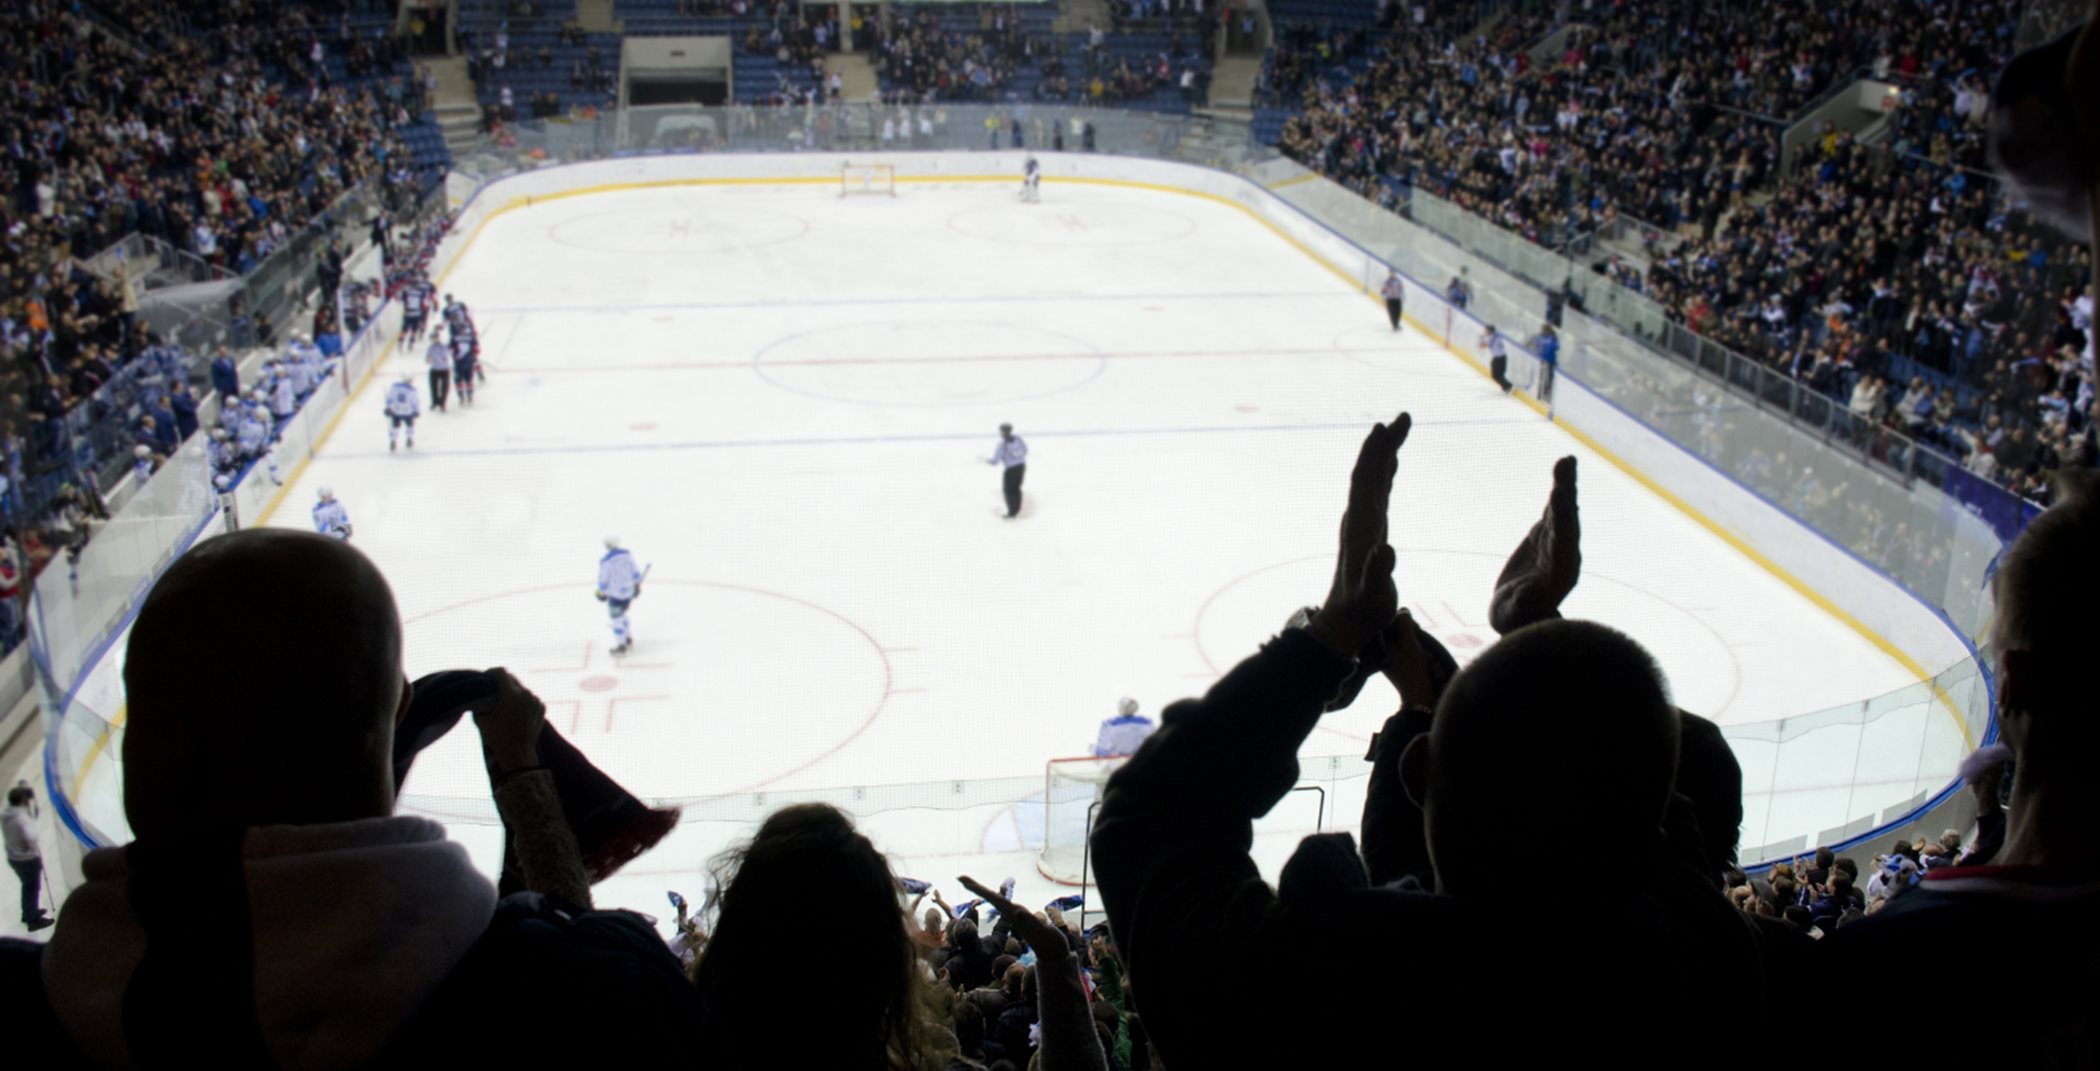 Fans cheering at ice hockey game